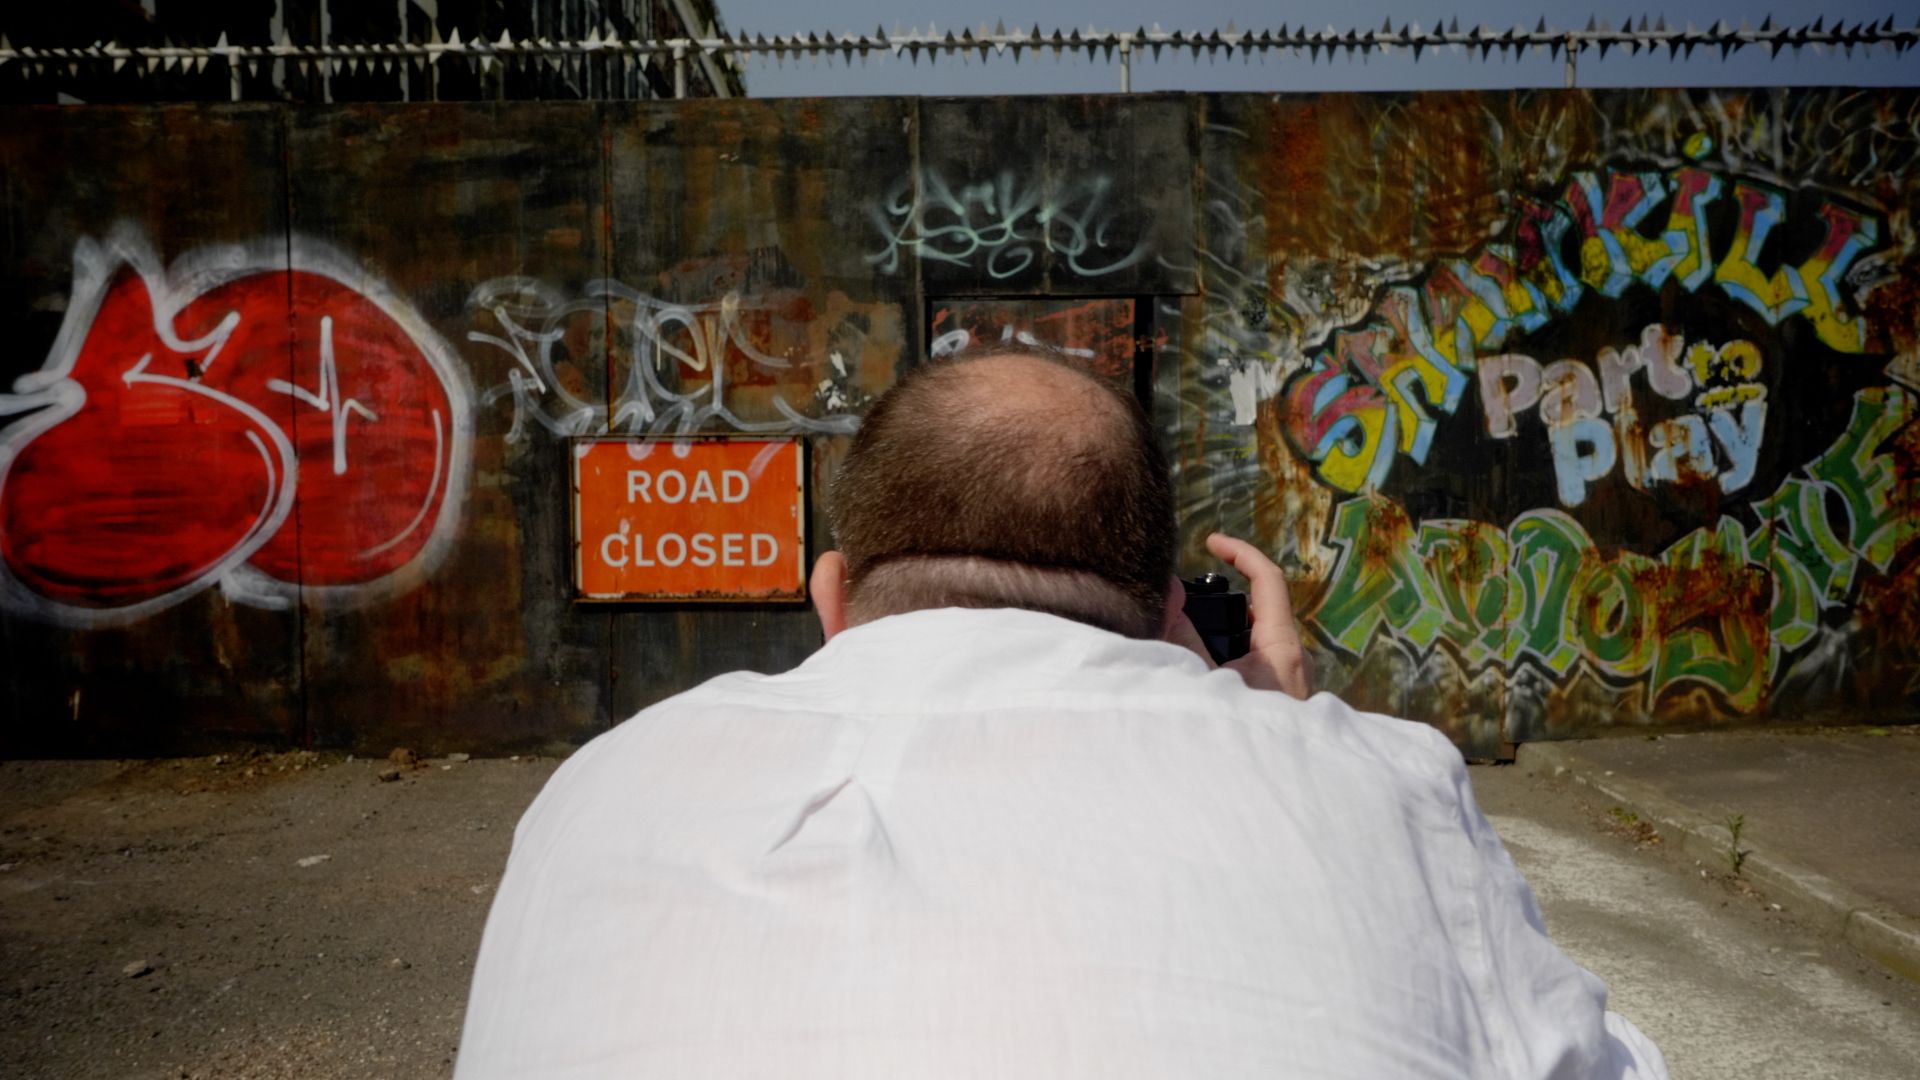 VISION: Short Strand photographer Frankie Quinn has been documenting the peace walls for years